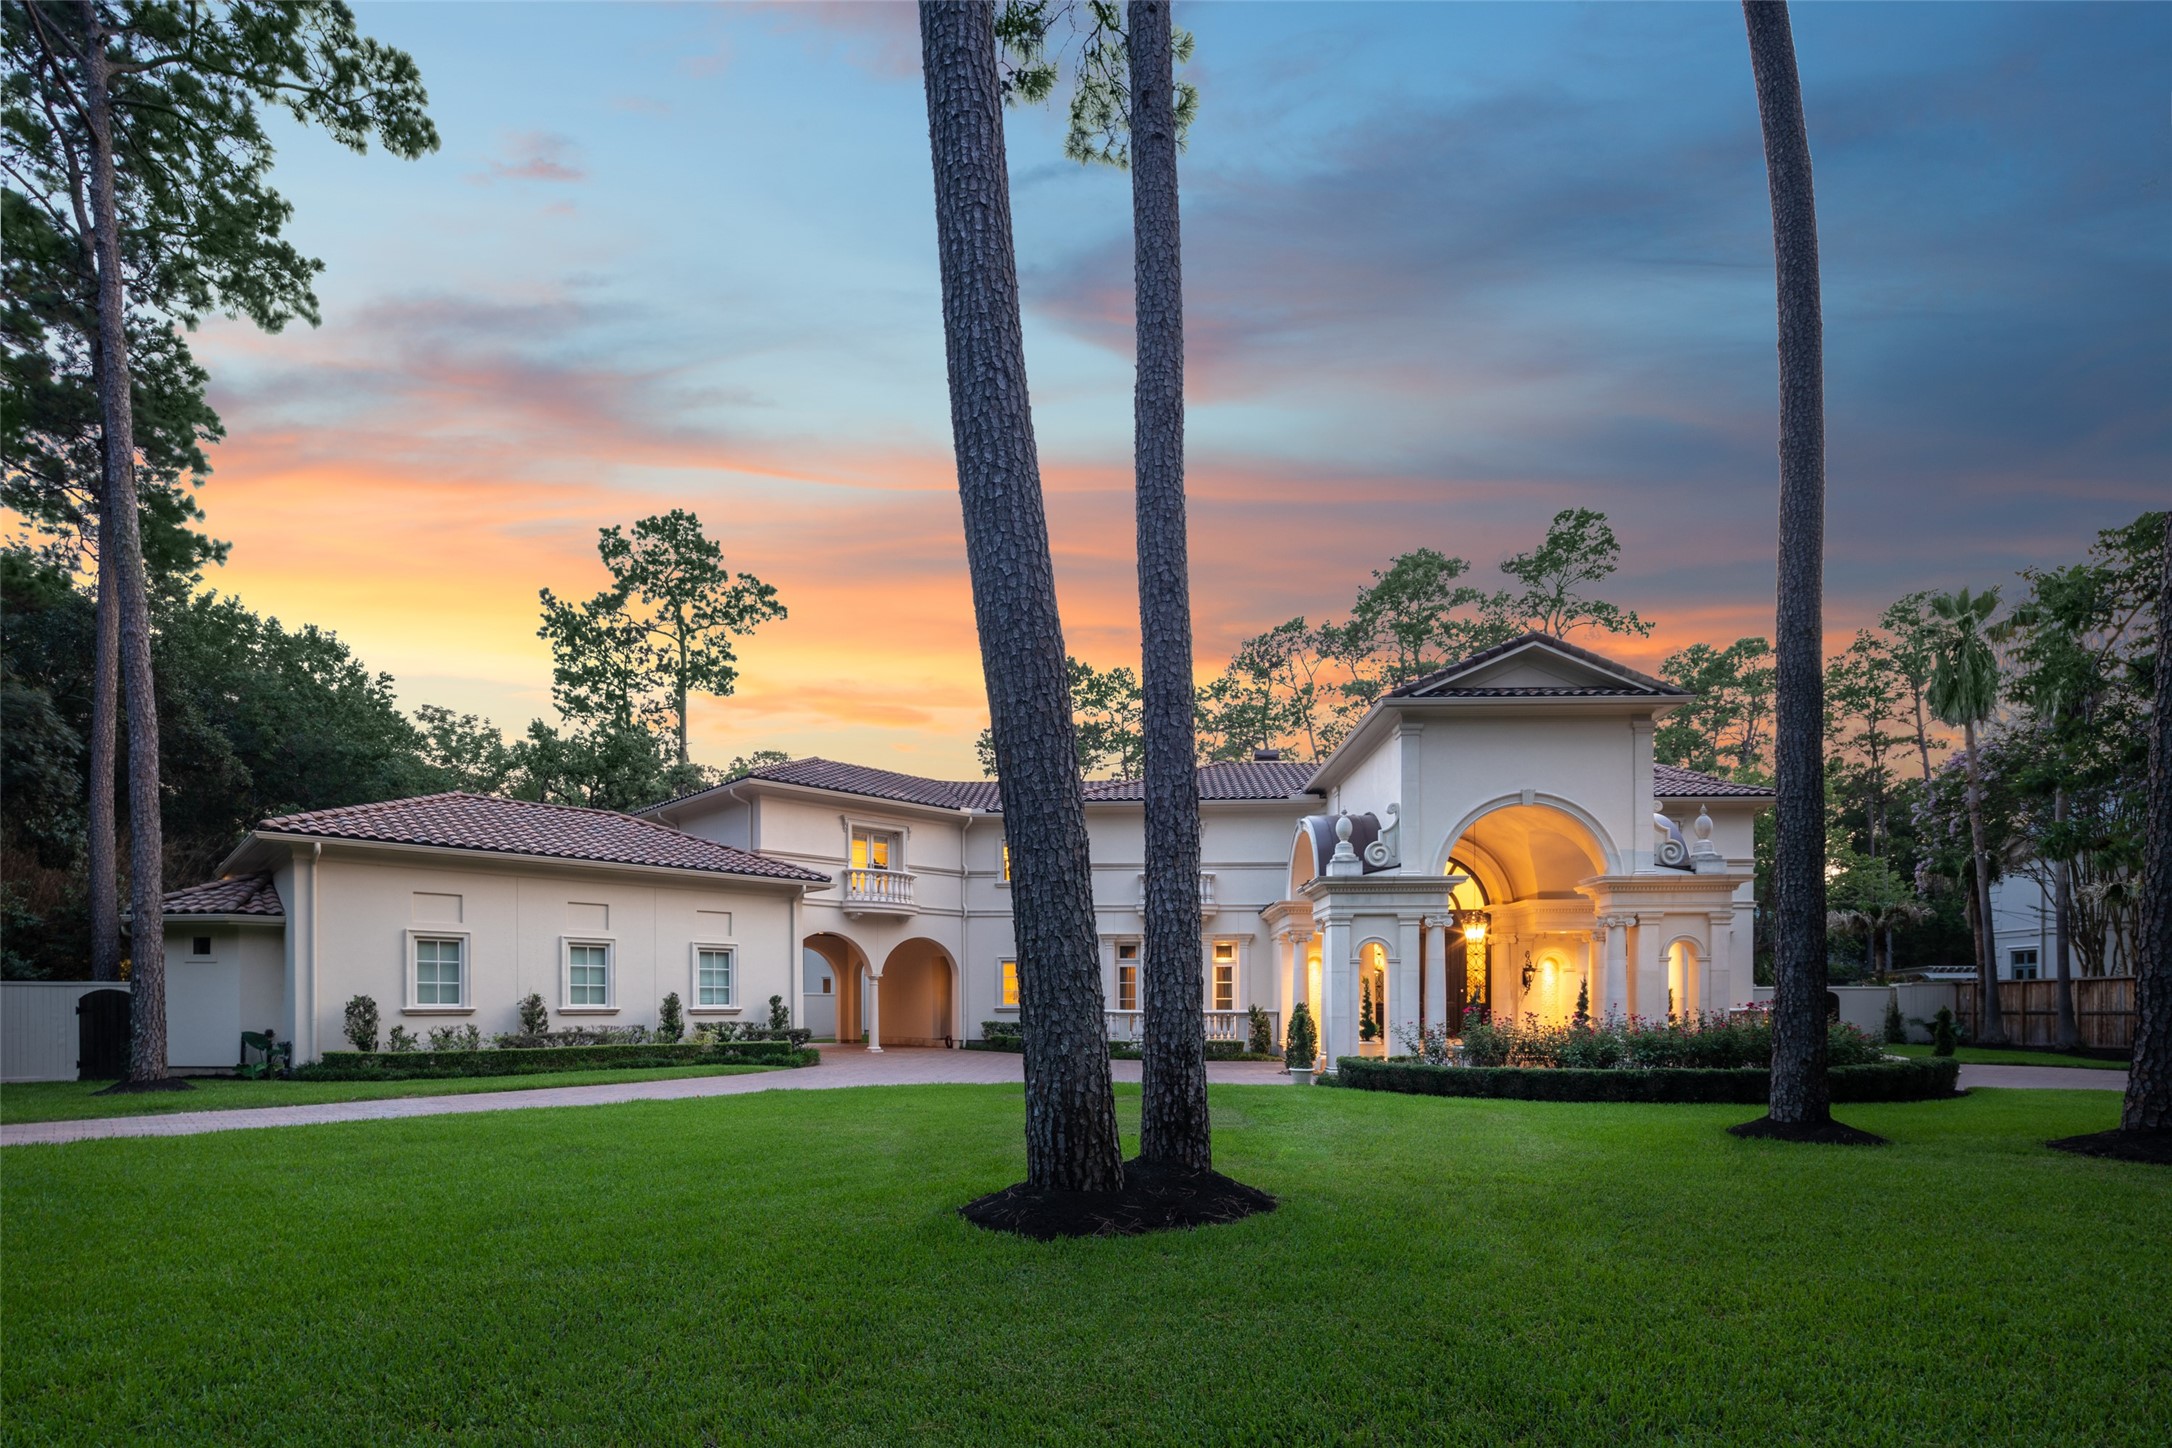 Nestled in the prestigious Memorial area in Bunker Hill, this grand home sits on a sprawling 1.3-acre lot.  This magnificent residence offers an unparalleled lifestyle for those seeking luxury and space.